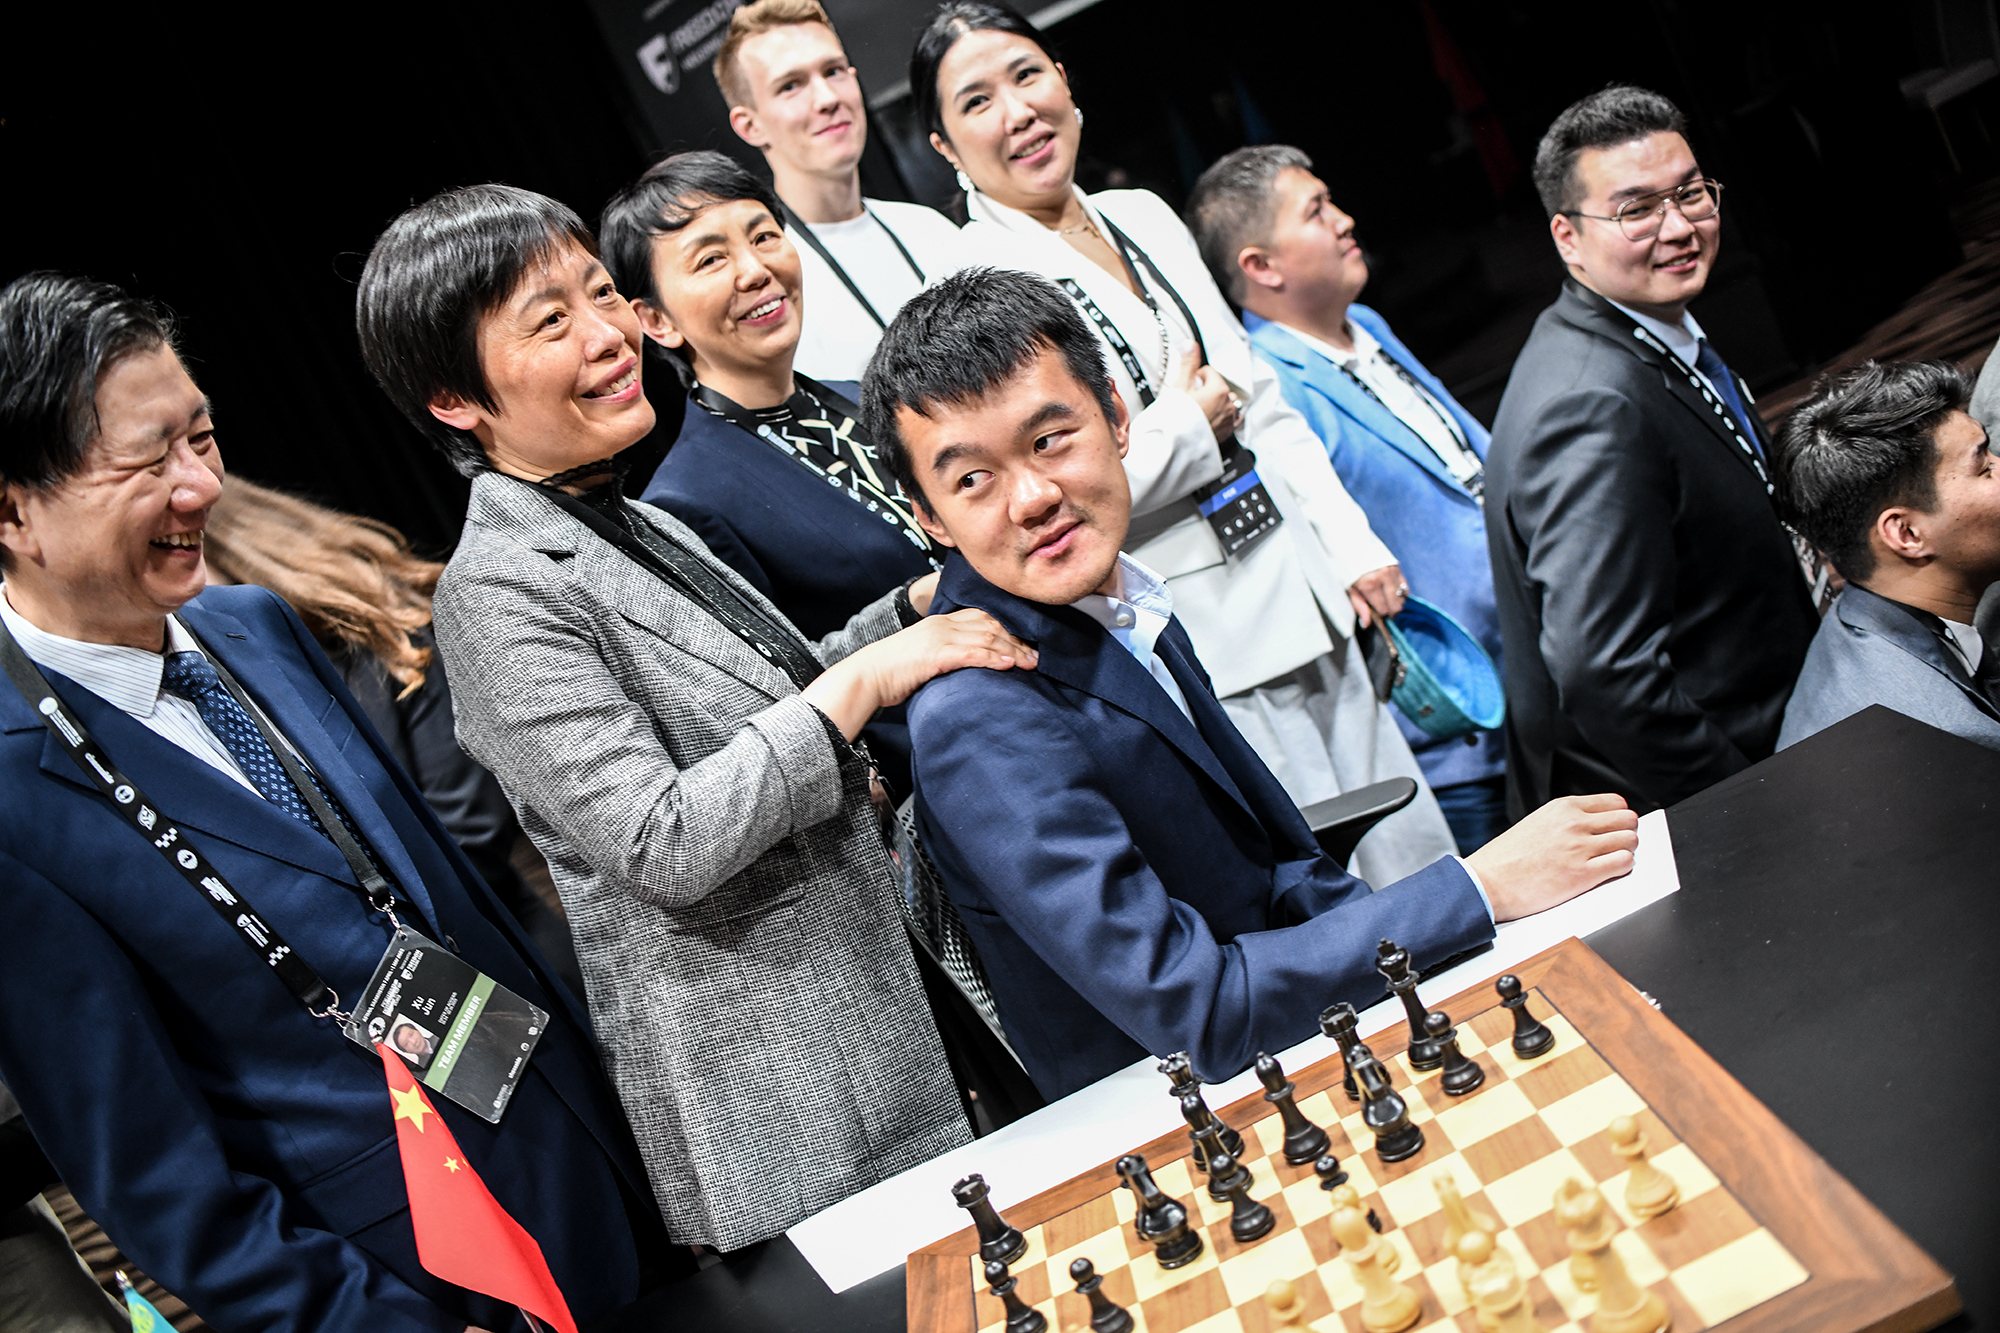 Ding Liren makes history as China's first men's world chess champ